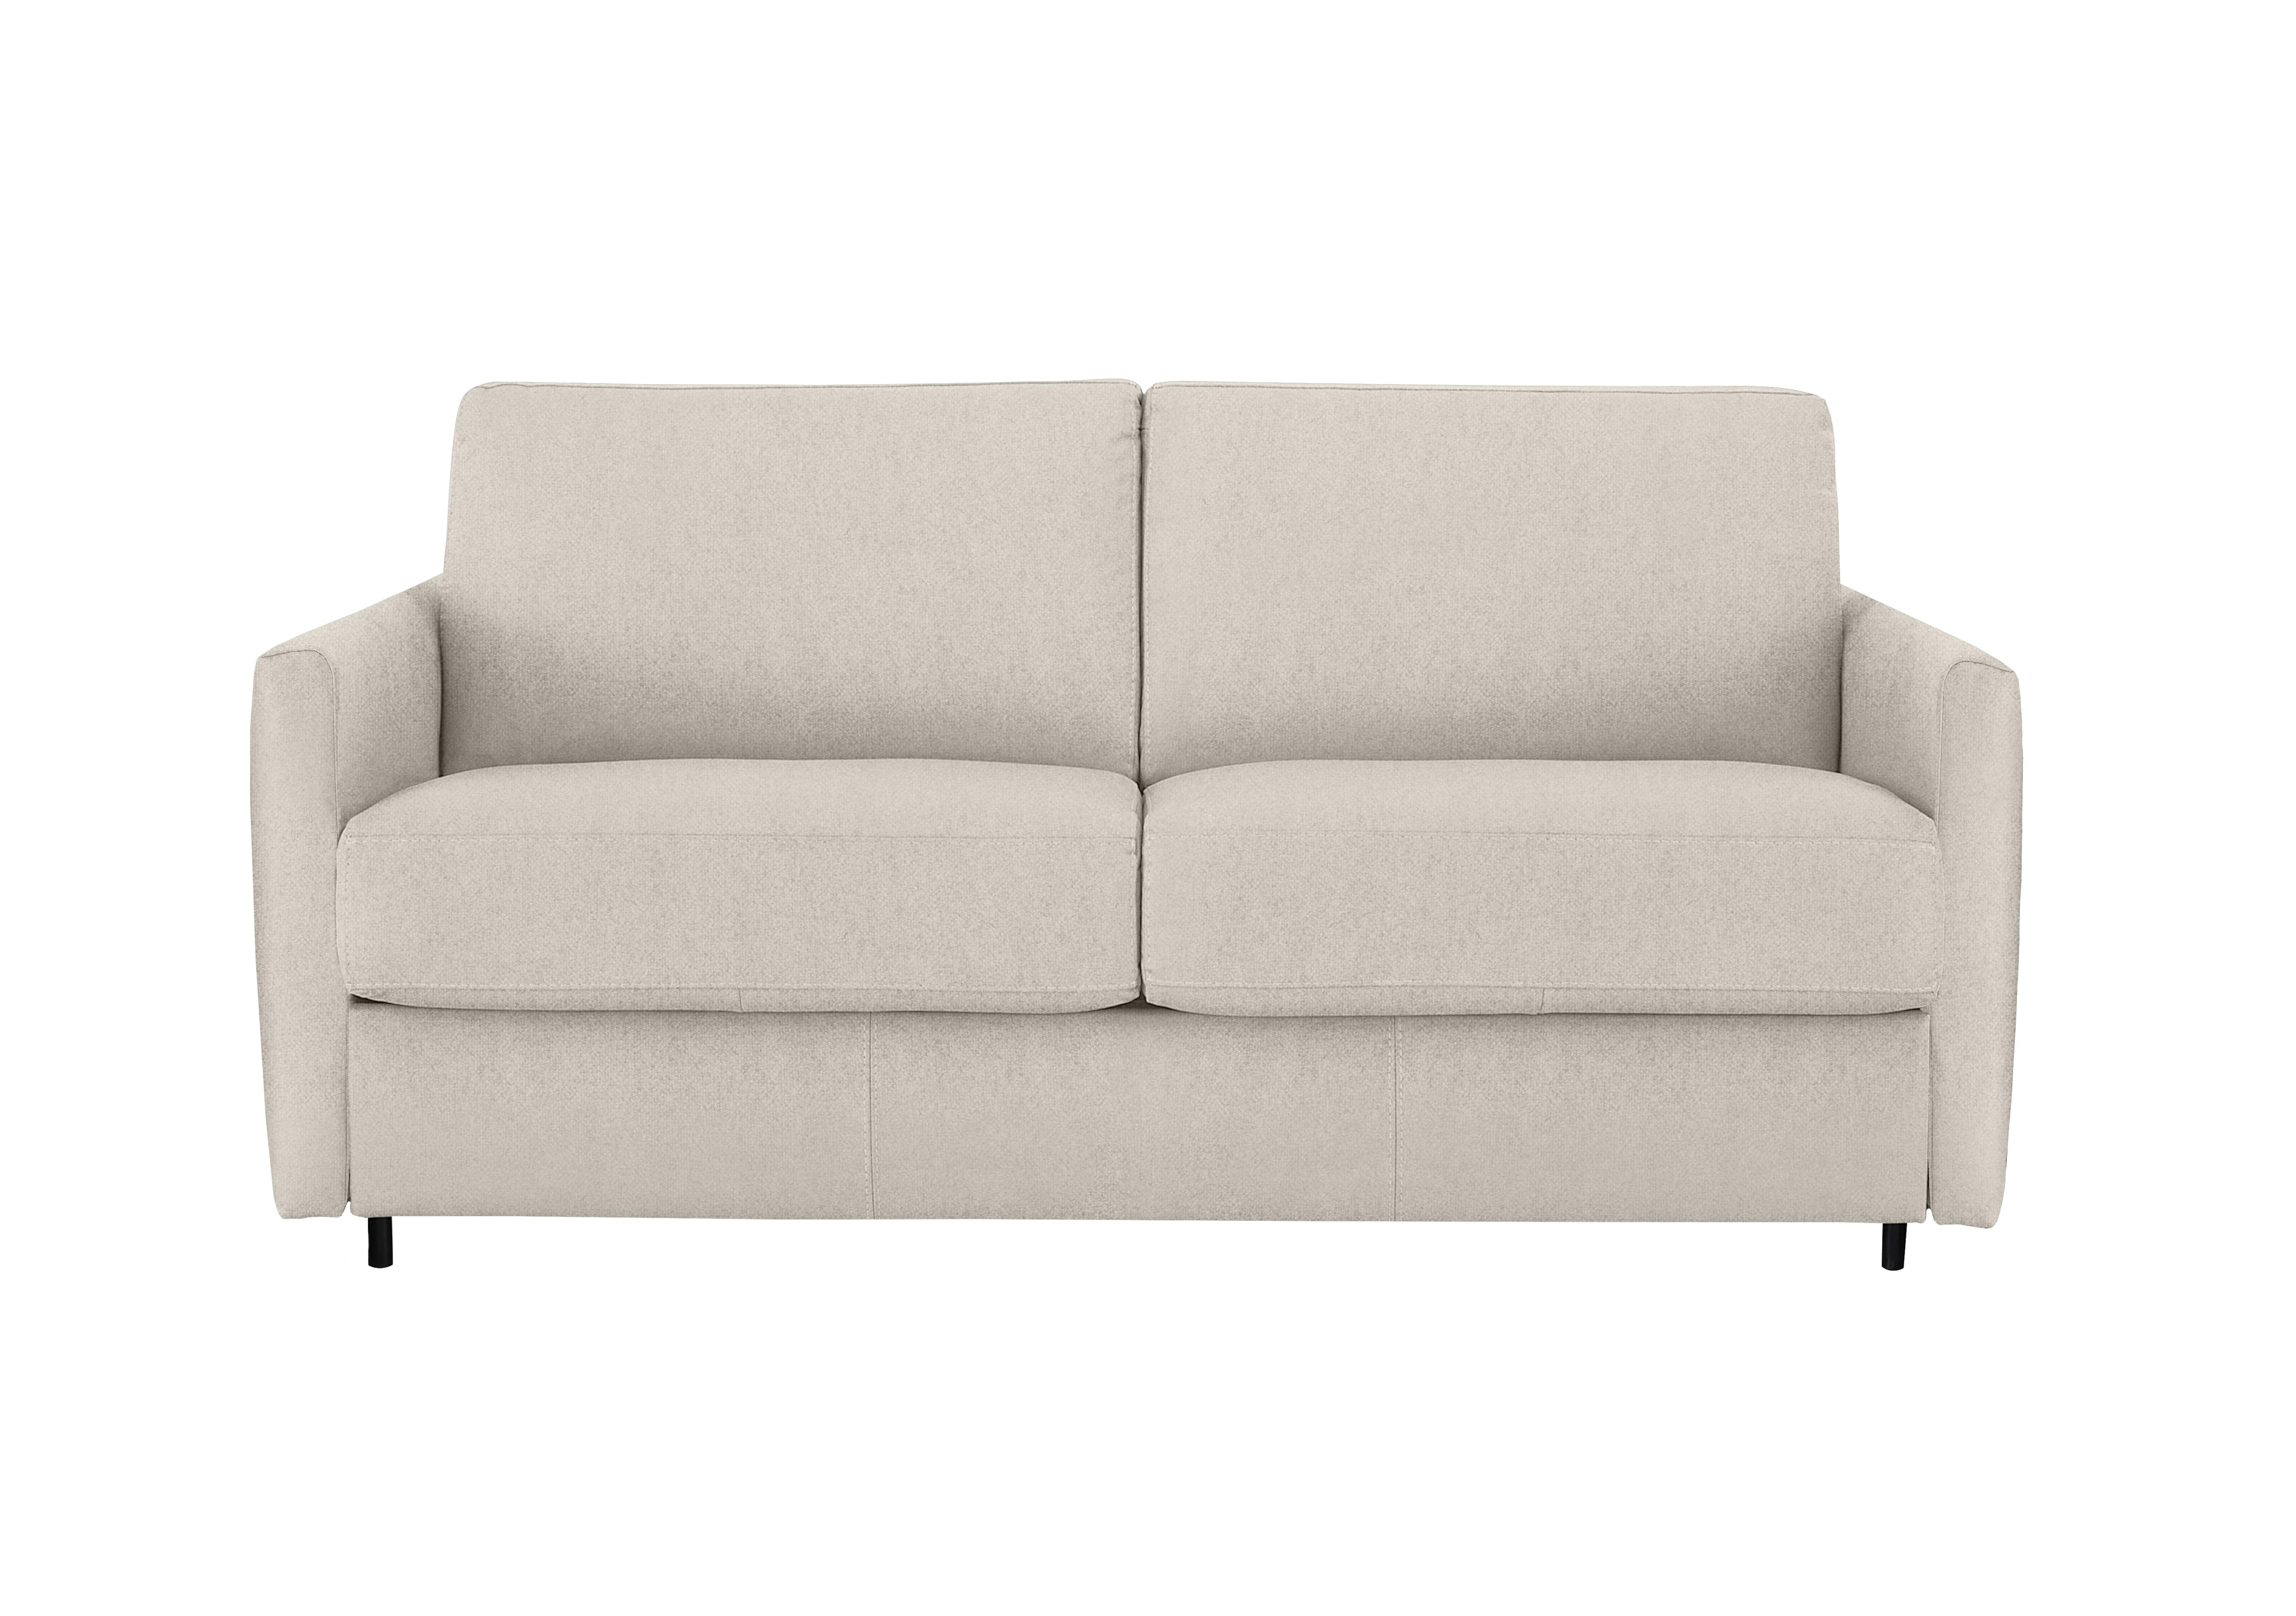 Alcova 2.5 Seater Fabric Sofa Bed with Slim Arms in Fuente Beige on Furniture Village